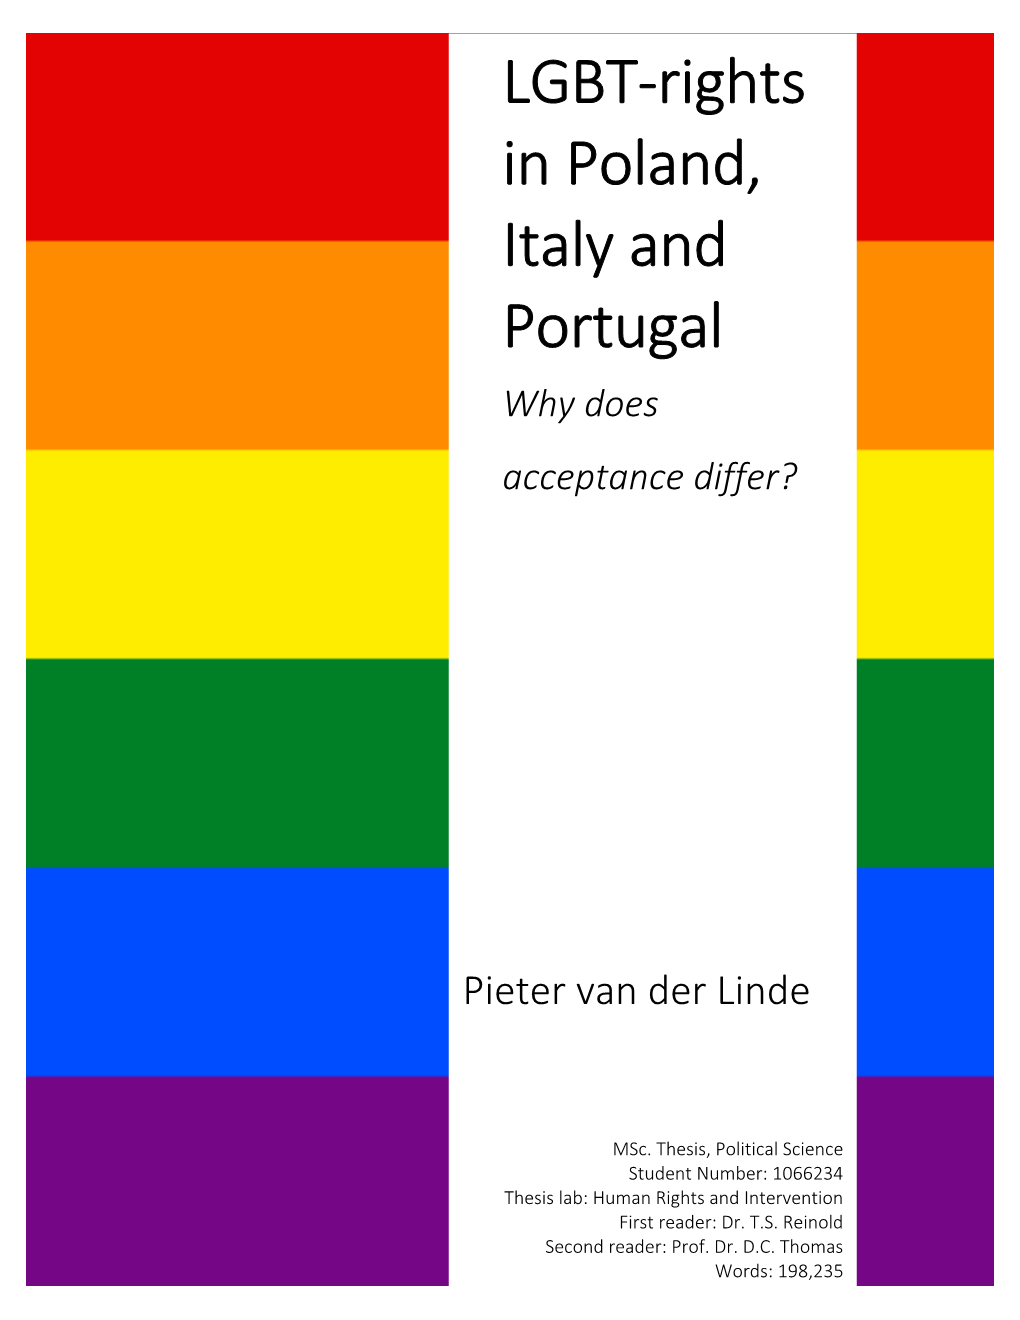 LGBT-Rights in Poland, Italy and Portugal?